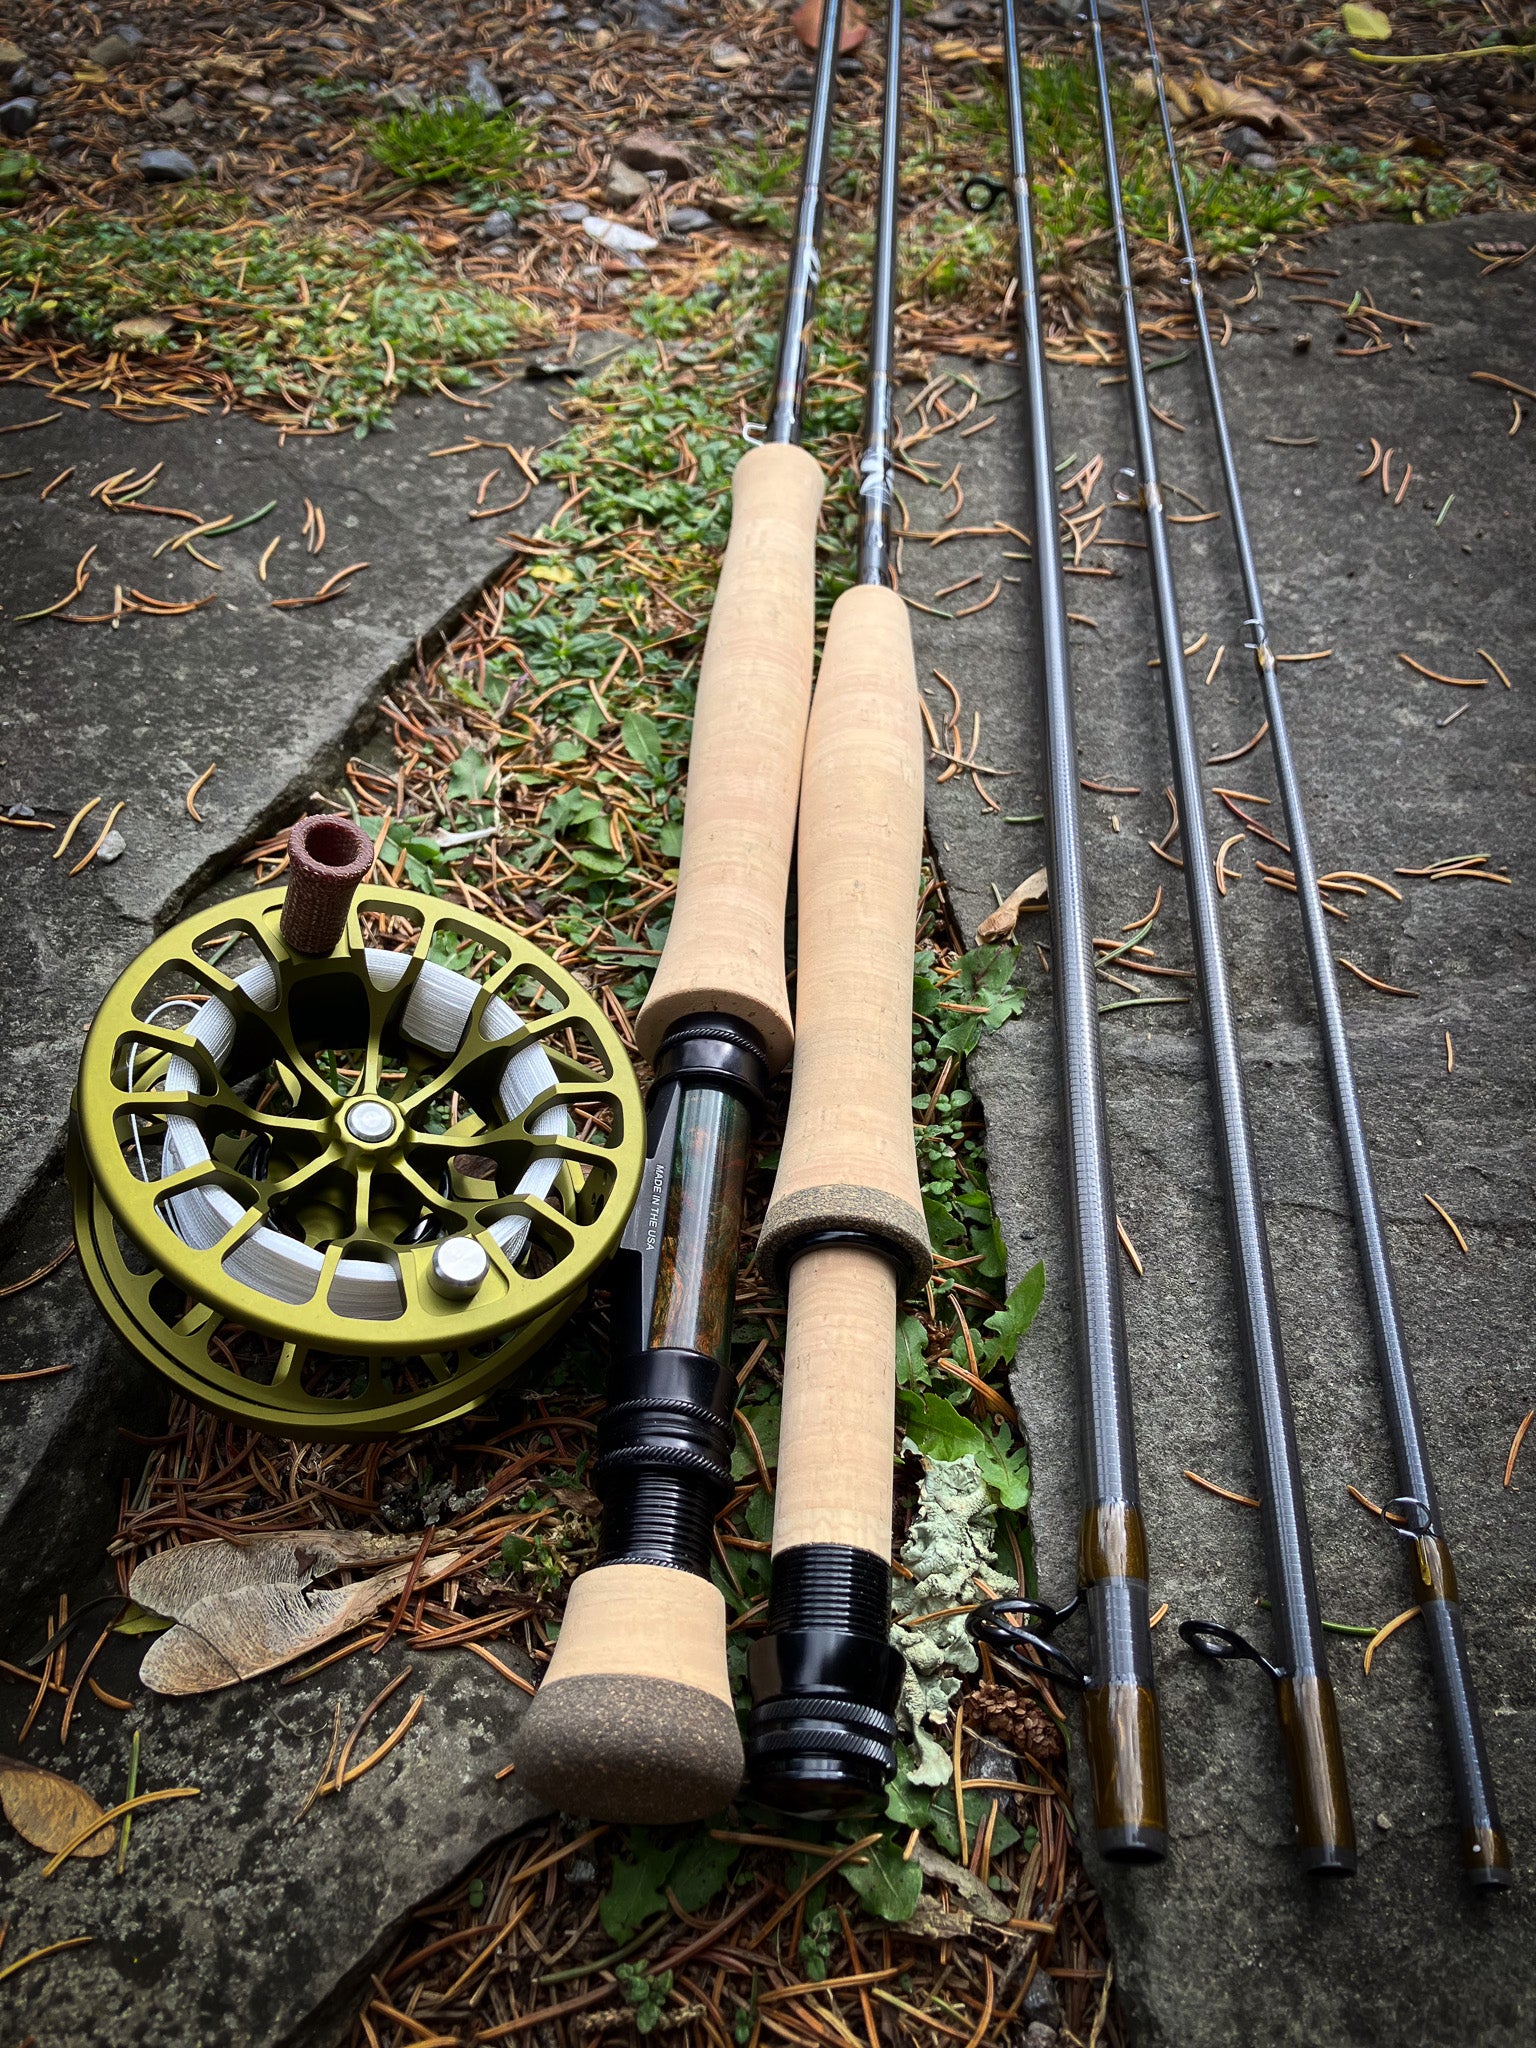 Peacemaker 10'6 4 wt. 4 pc. & 8'0 3-4 wt. 3 pc. 2 rods in one